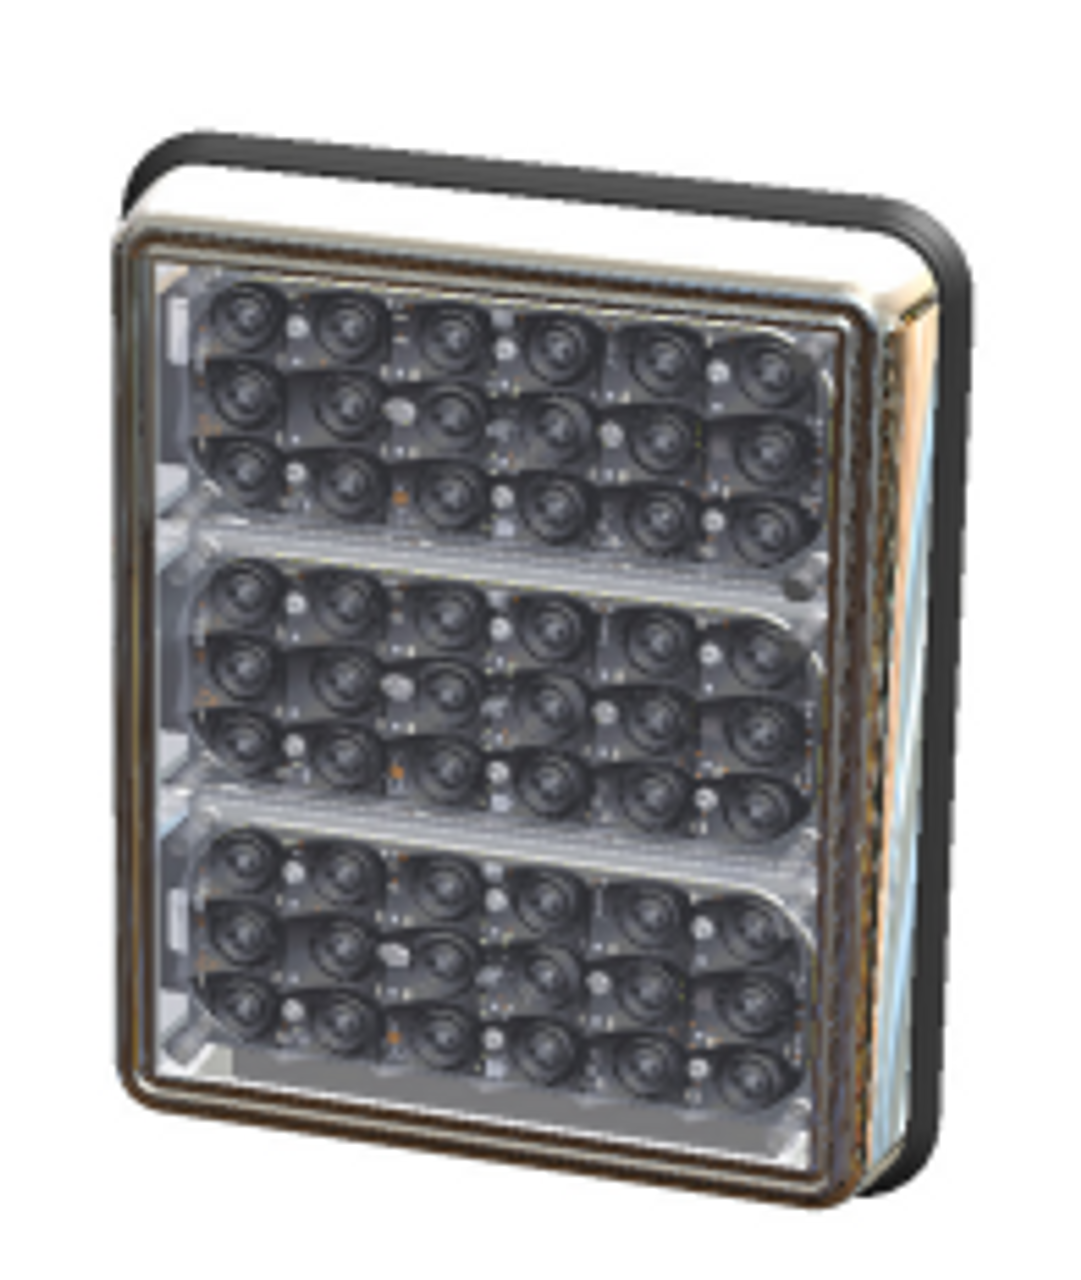 SoundOff Signal PMP8BZL13B	- Black Triple Bezel (includes gasket & hardware) for use with (3) mpower® 7x3 Lights